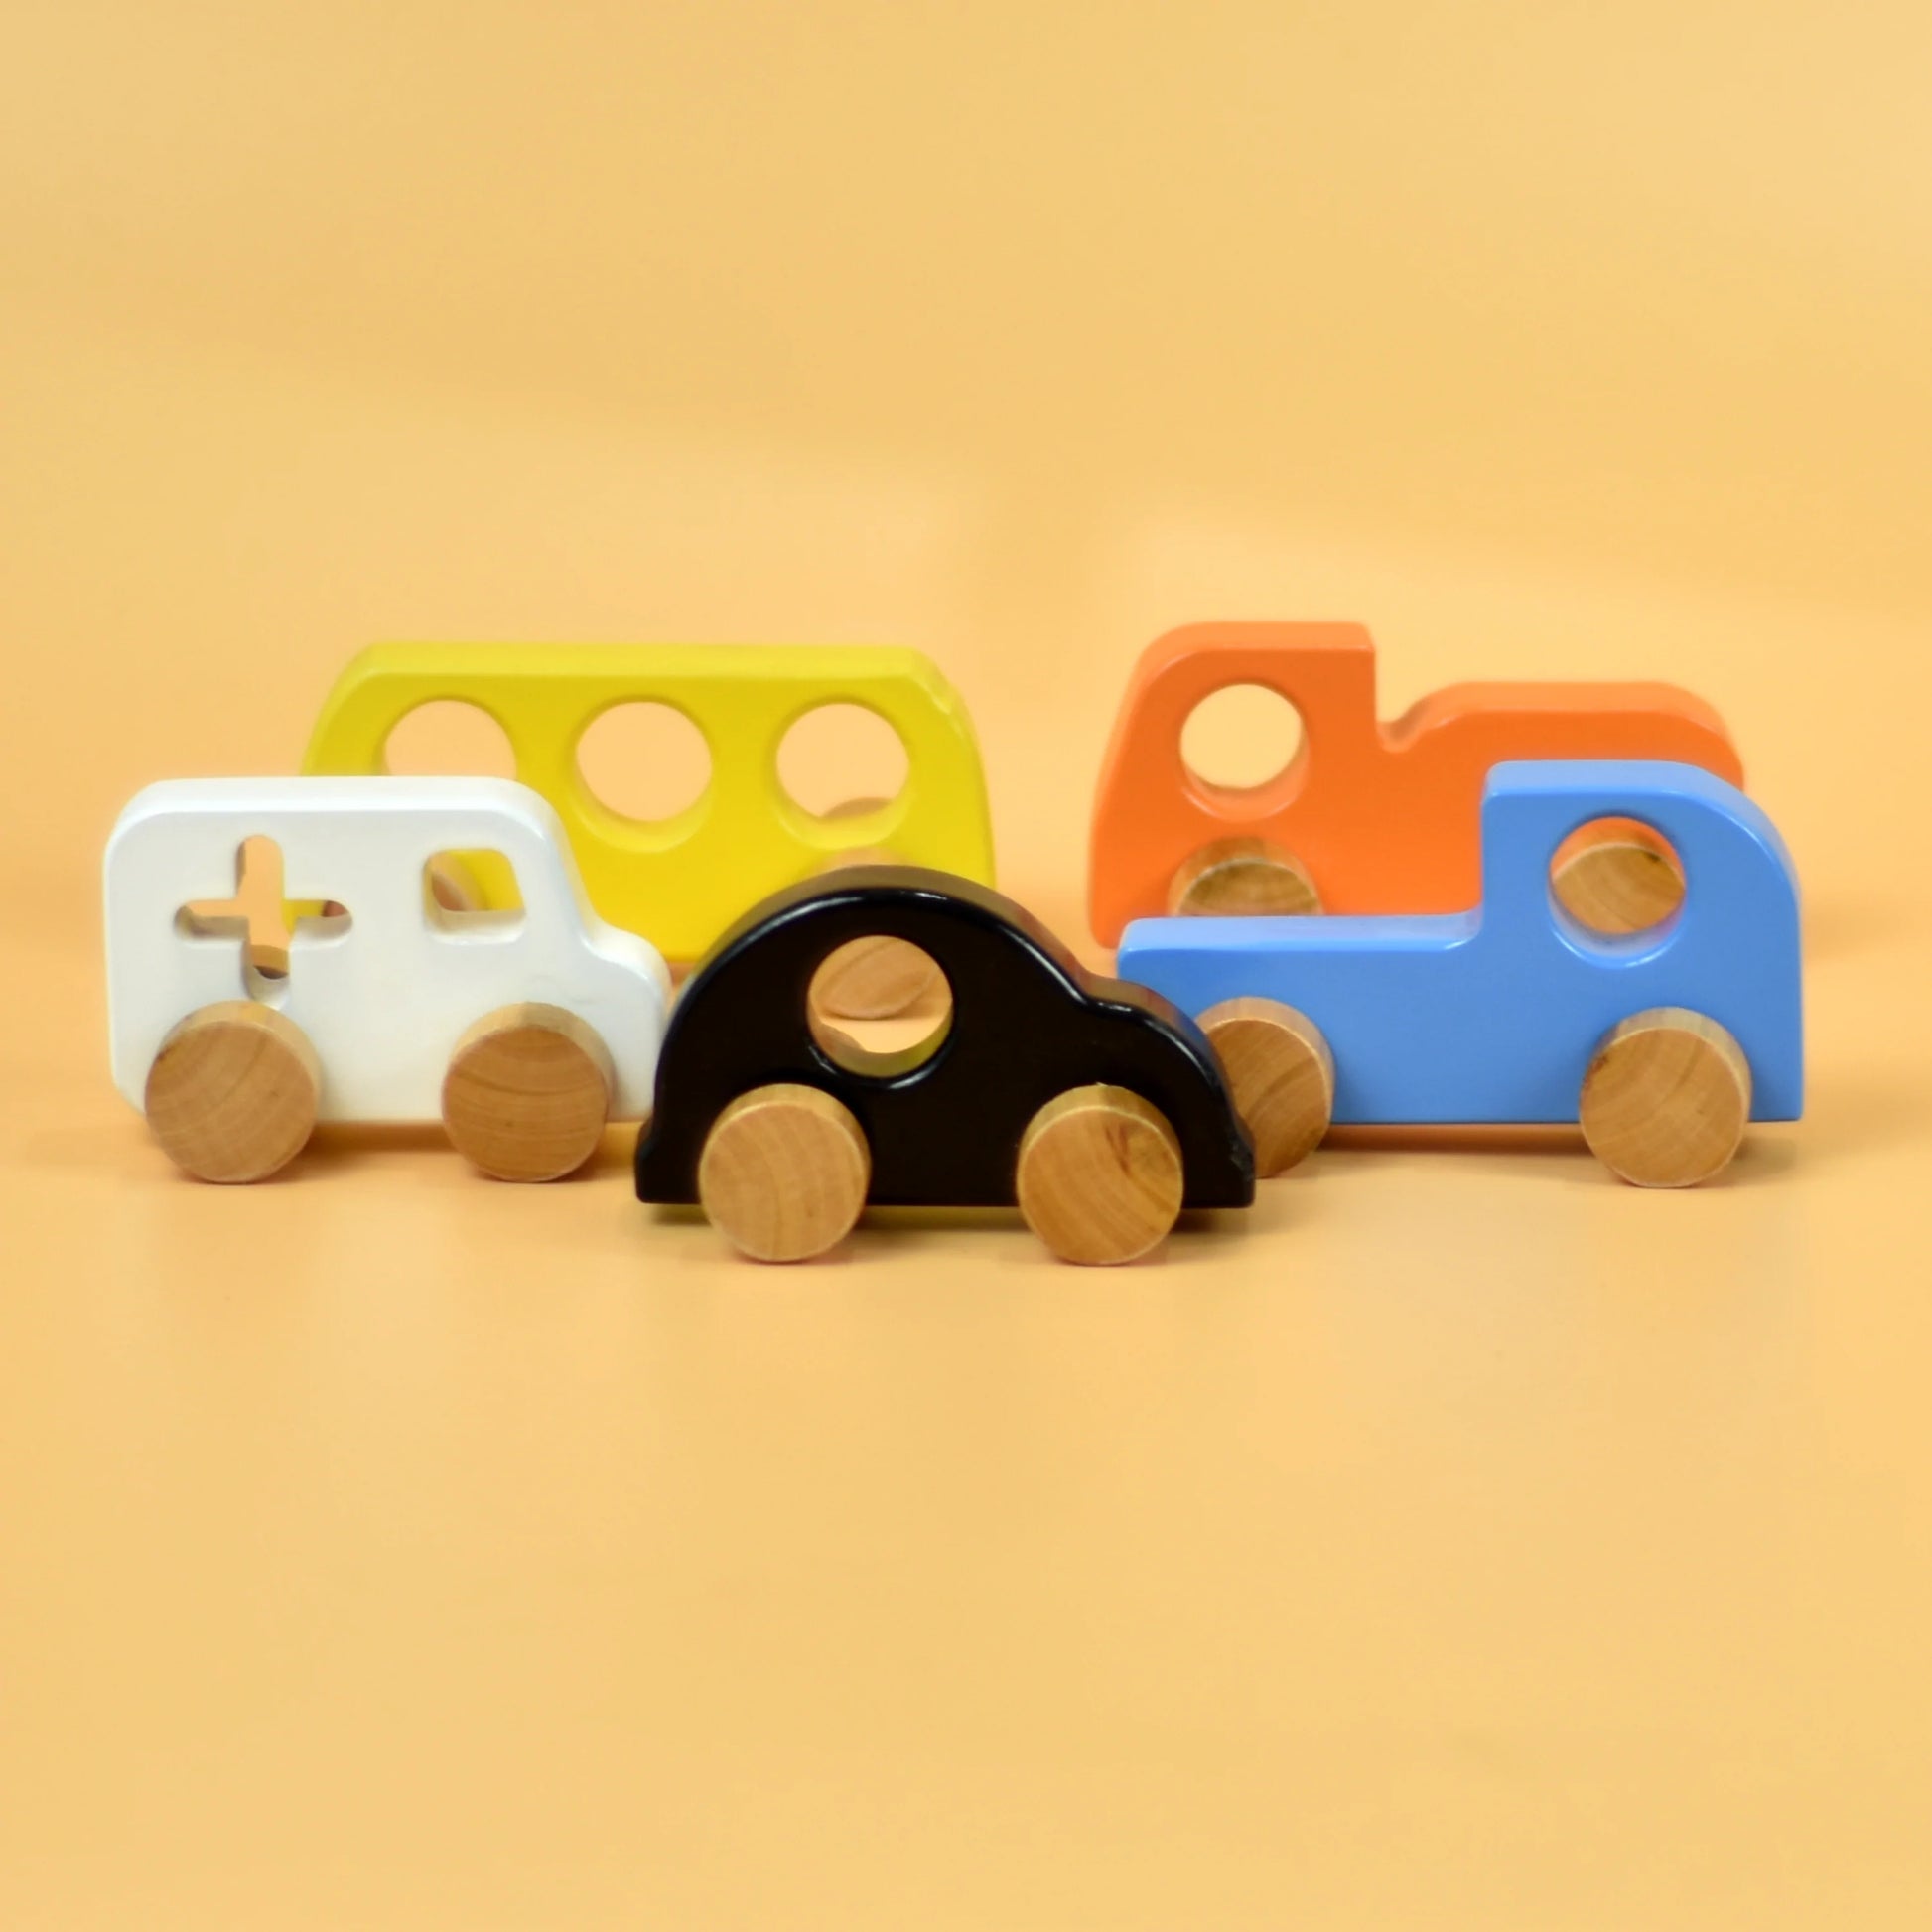 Buy Wooden Vehicle Play Toy - SkilloToys.com